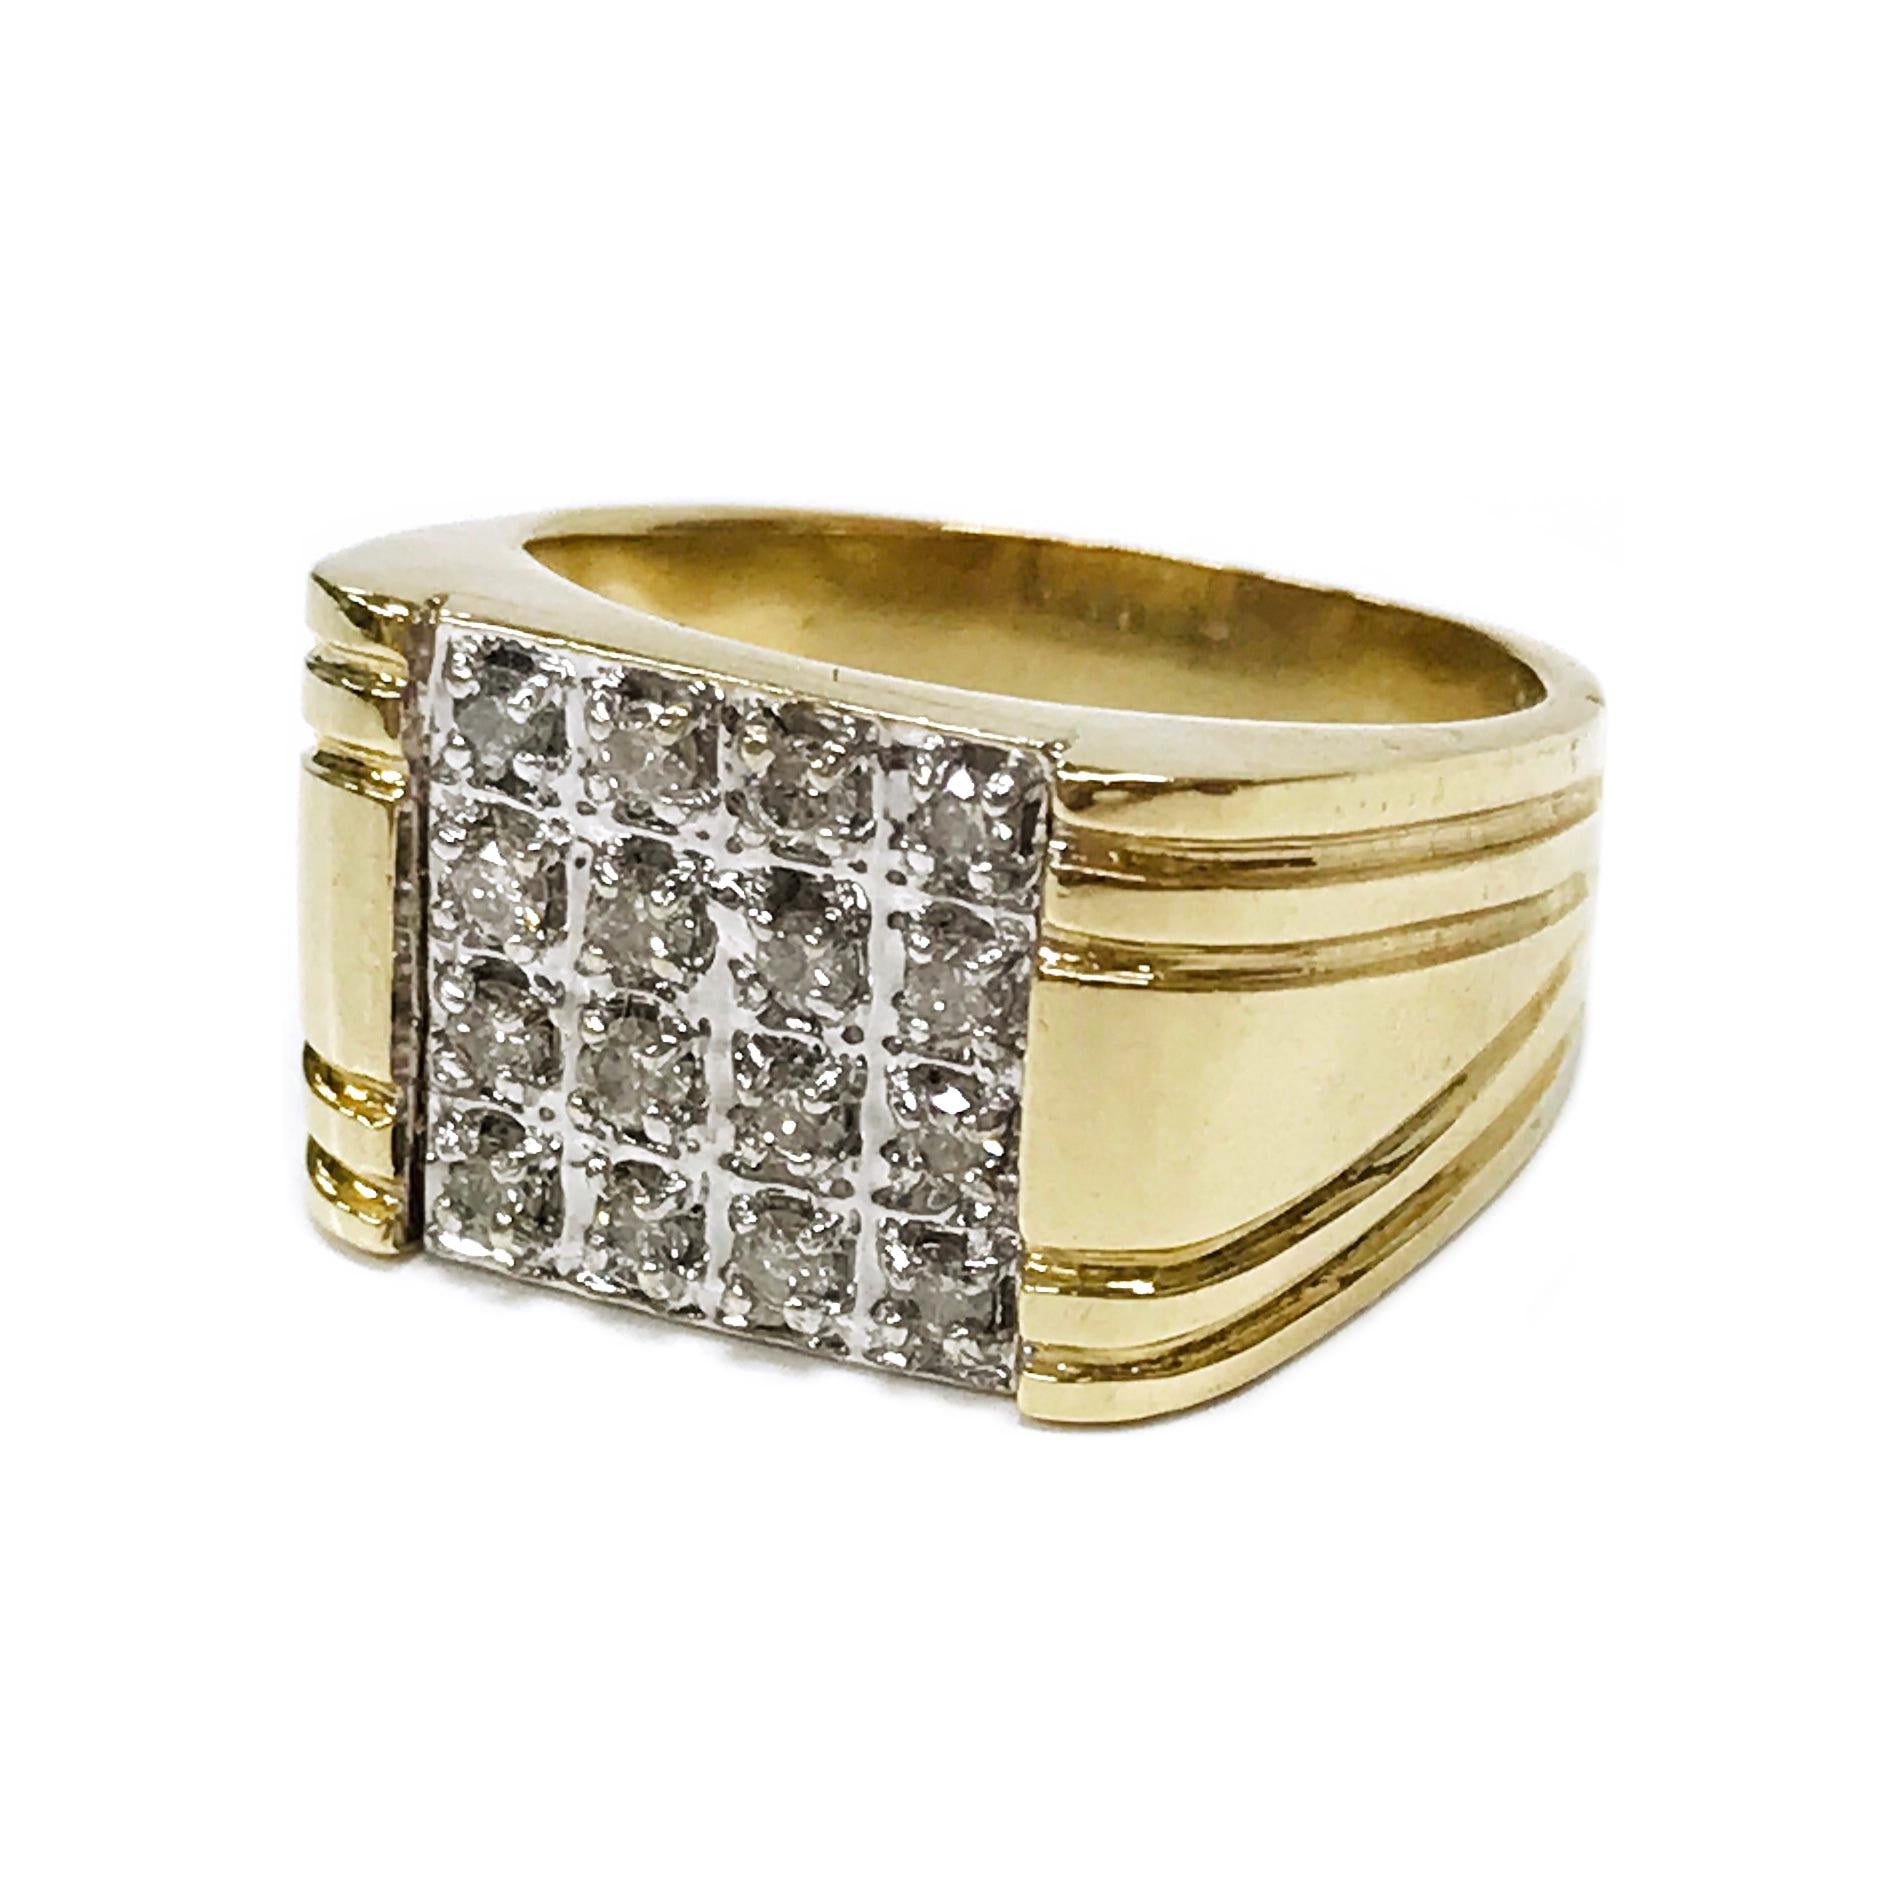 10 Karat Two-Tone Diamond Ring. The ring features sixteen round prong-set diamonds. The ring has double ridges running from the top of the ring to about half way down the side, the ring also tapers. The square face of the ring has sixteen diamonds